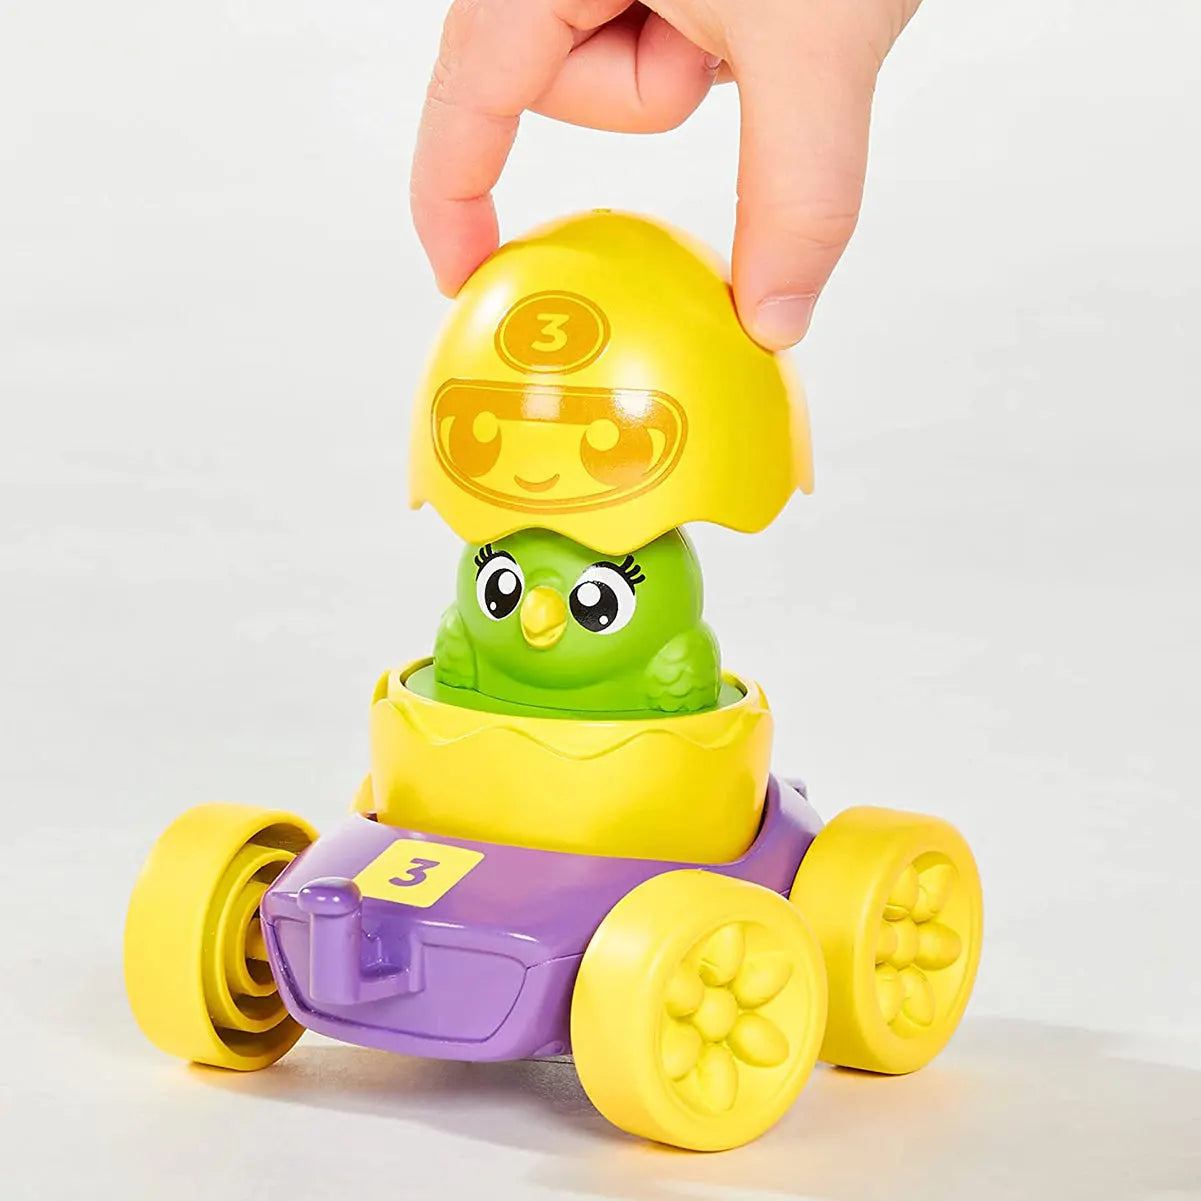 Toomies Egg Racers Assortment (Sold Separately Subject To Availability)